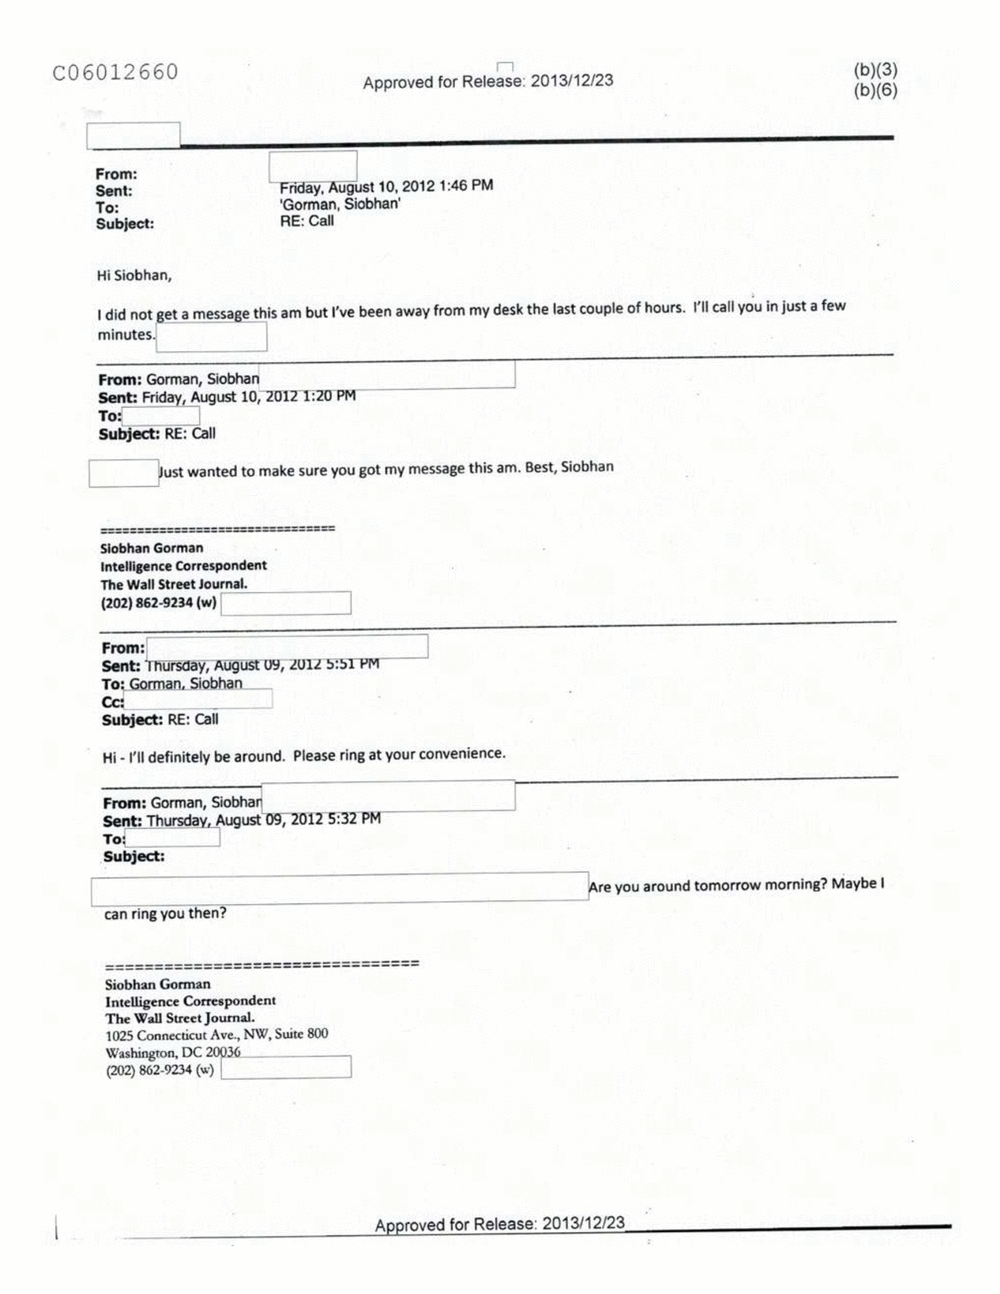 Page 238 from Email Correspondence Between Reporters and CIA Flacks